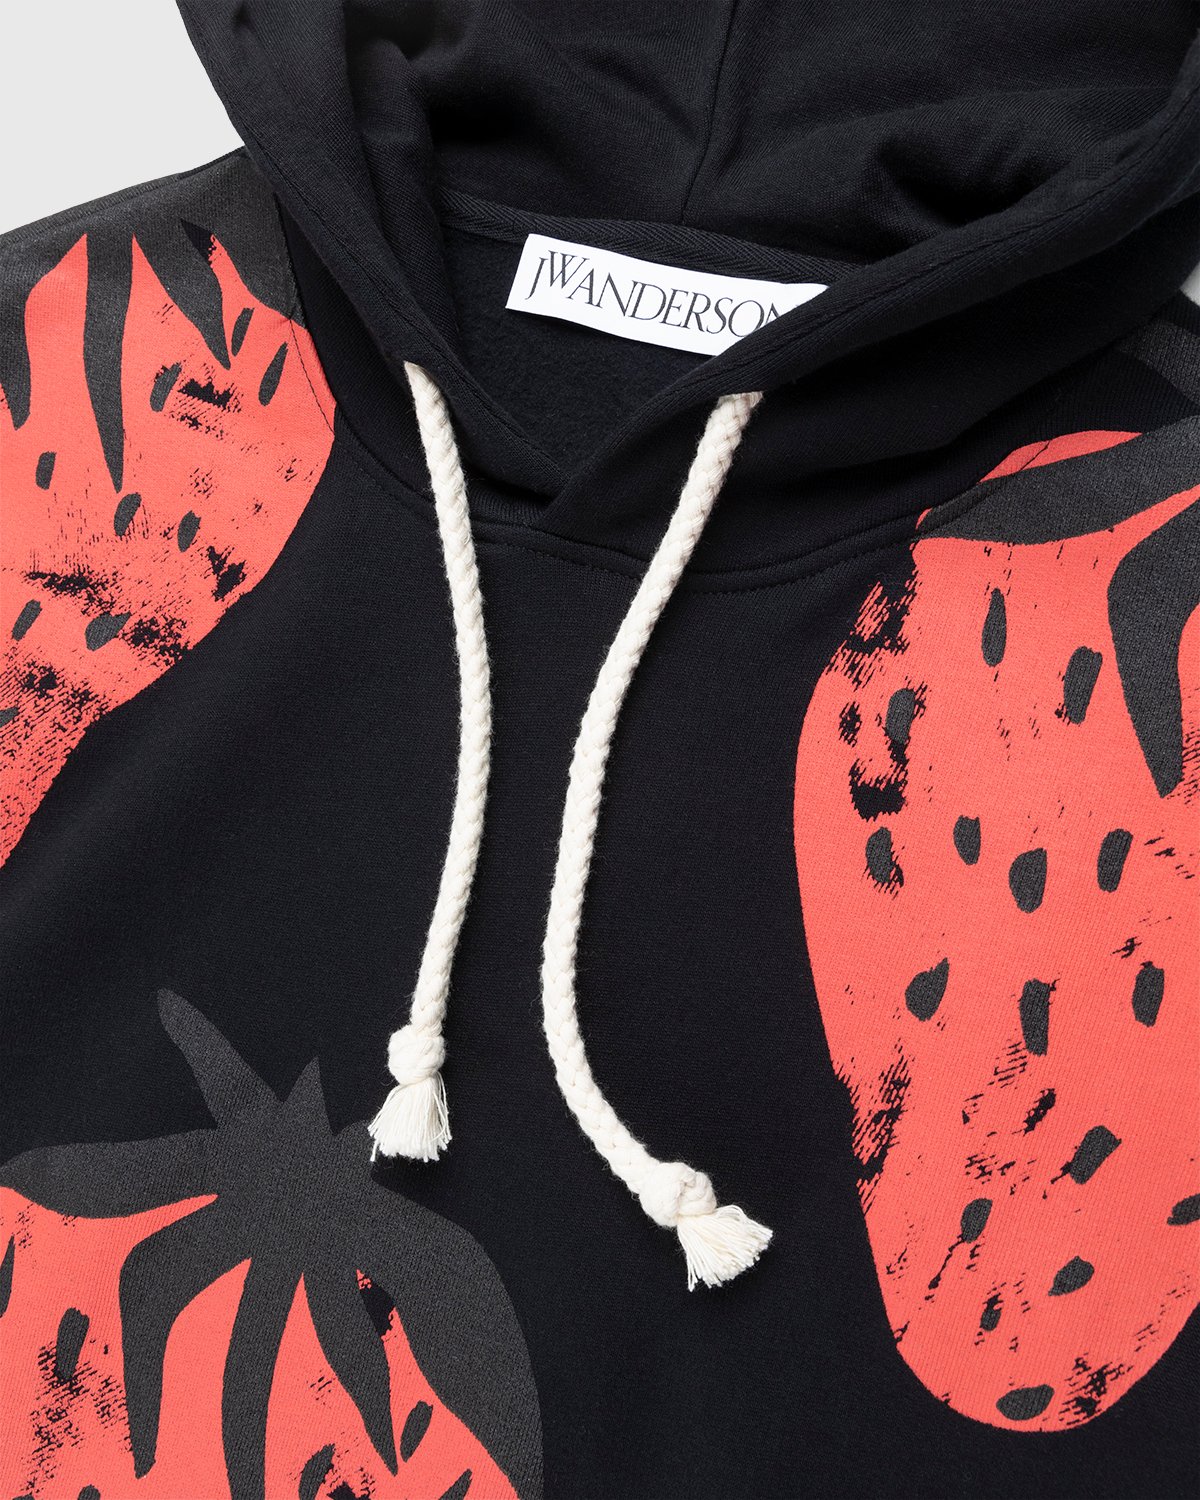 J.W. Anderson - Oversized Strawberry Hoodie Black/Red - Clothing - Black - Image 3